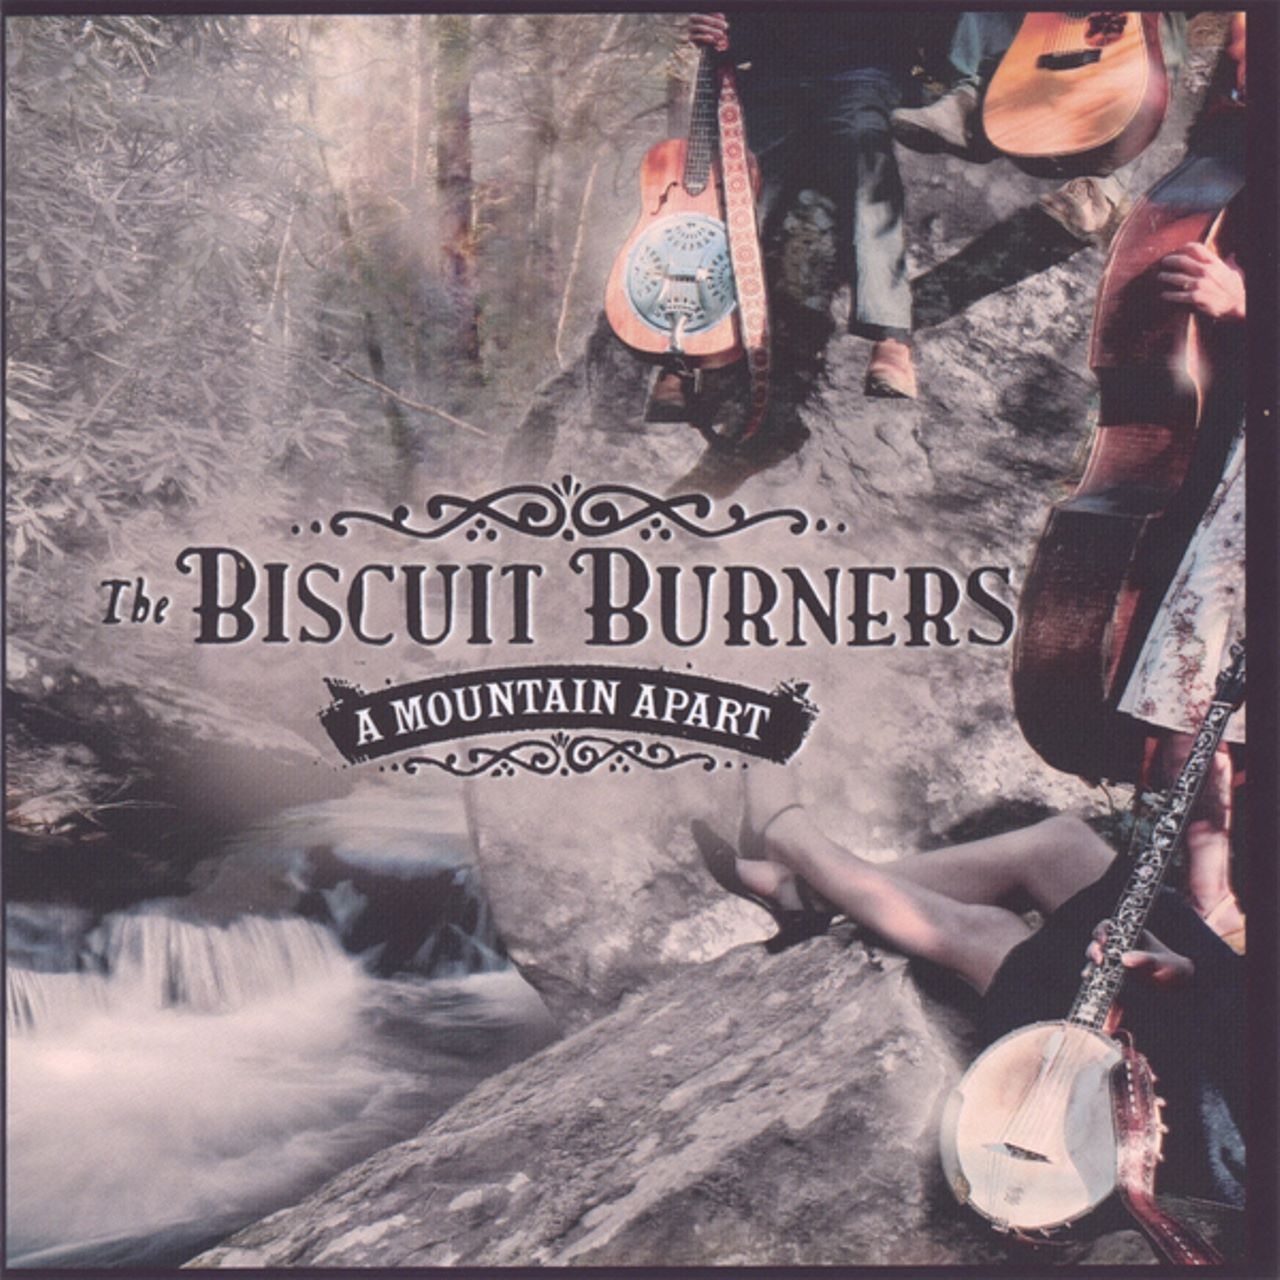 Biscuit Burners - A Mountain Apart cover album